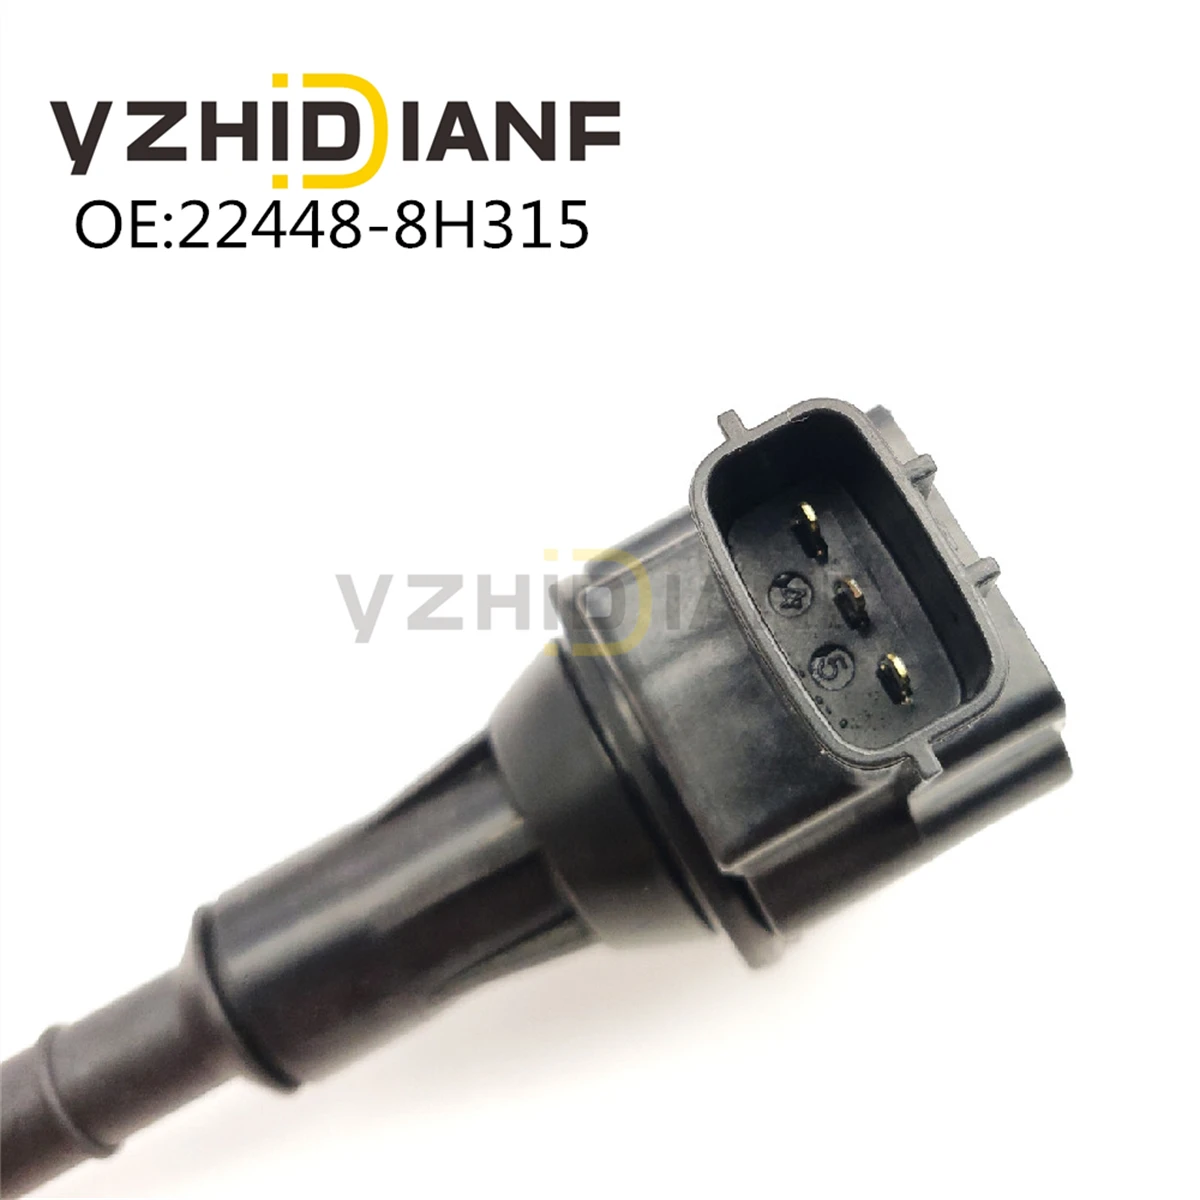 1X Ignition Coil 22448 8H315 8H314 8H300 8H310 8H311 For NISSAN- SENTRA ALTIMA TEANA X-TRAIL X TRAIL T30 T31 PRIMERA